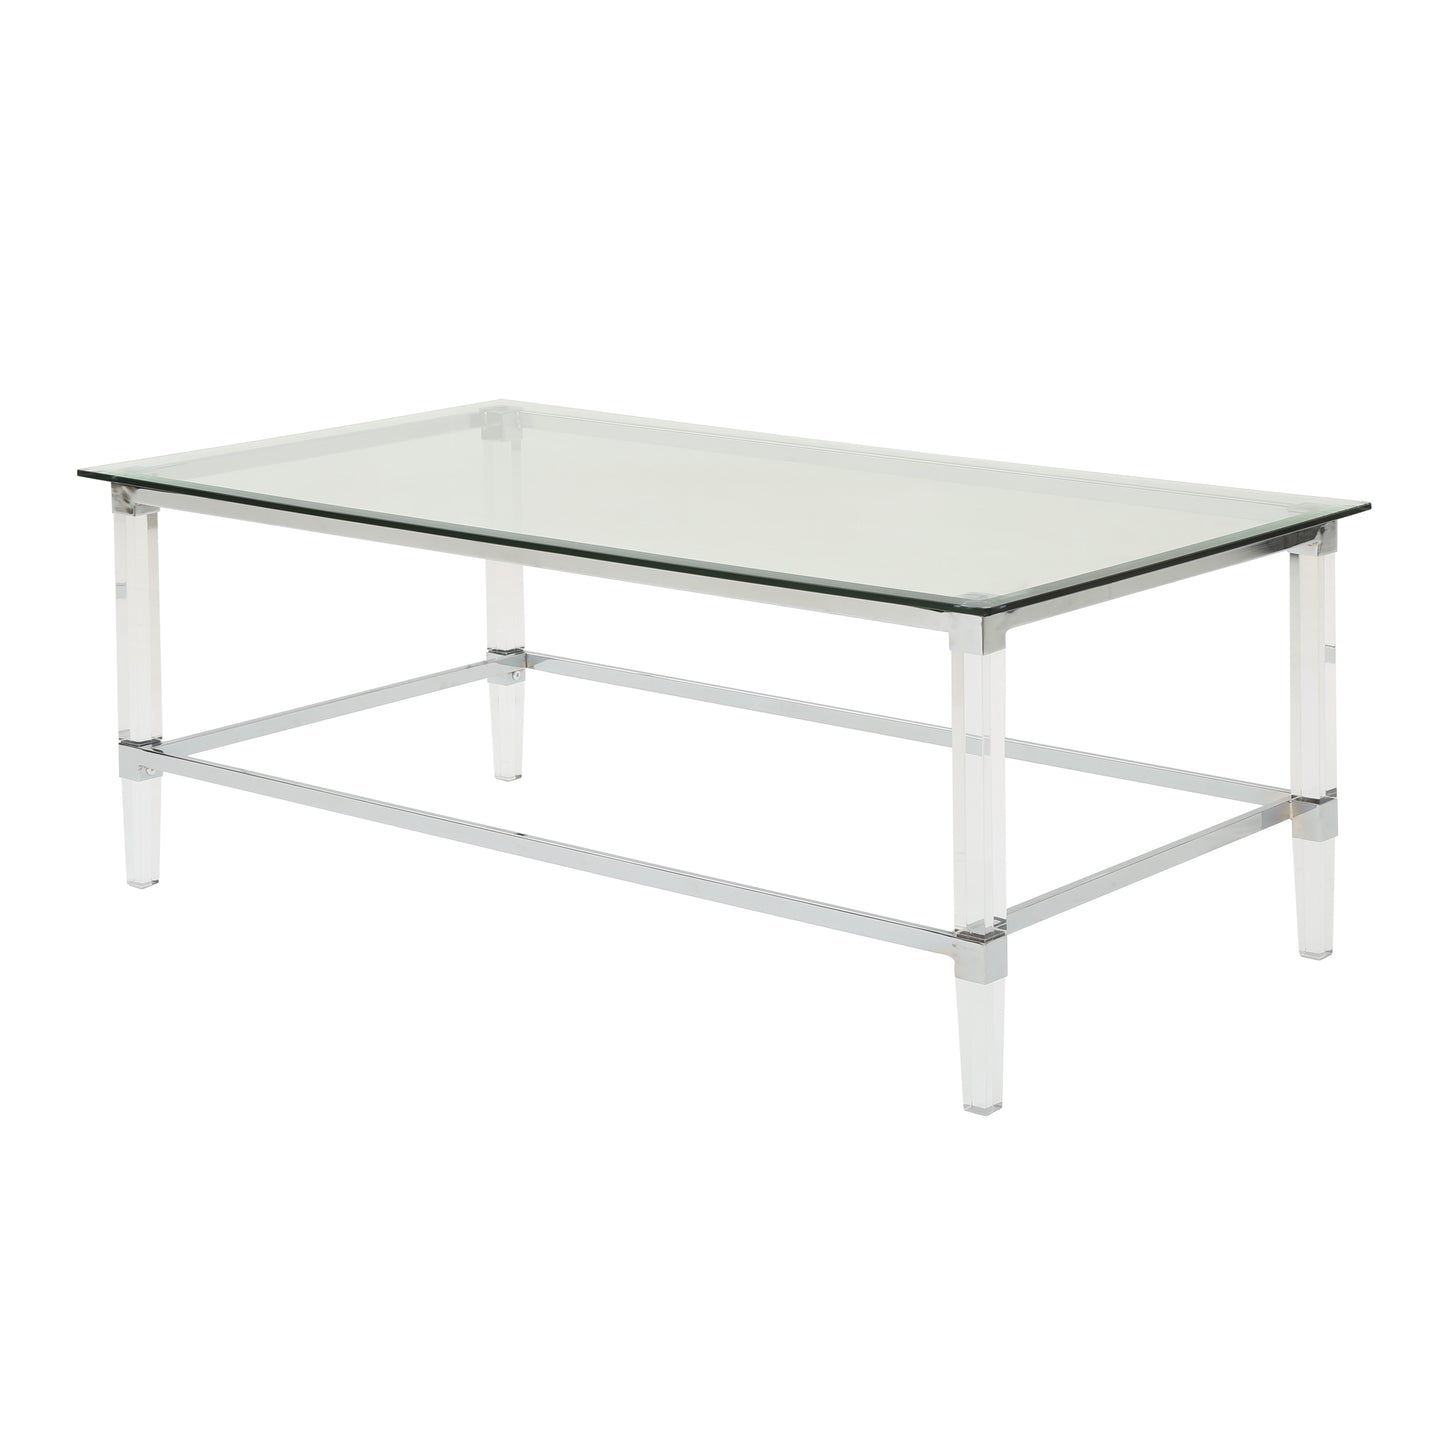 Bayor Modern Tempered Glass Coffee Table with Acrylic and Iron Accents